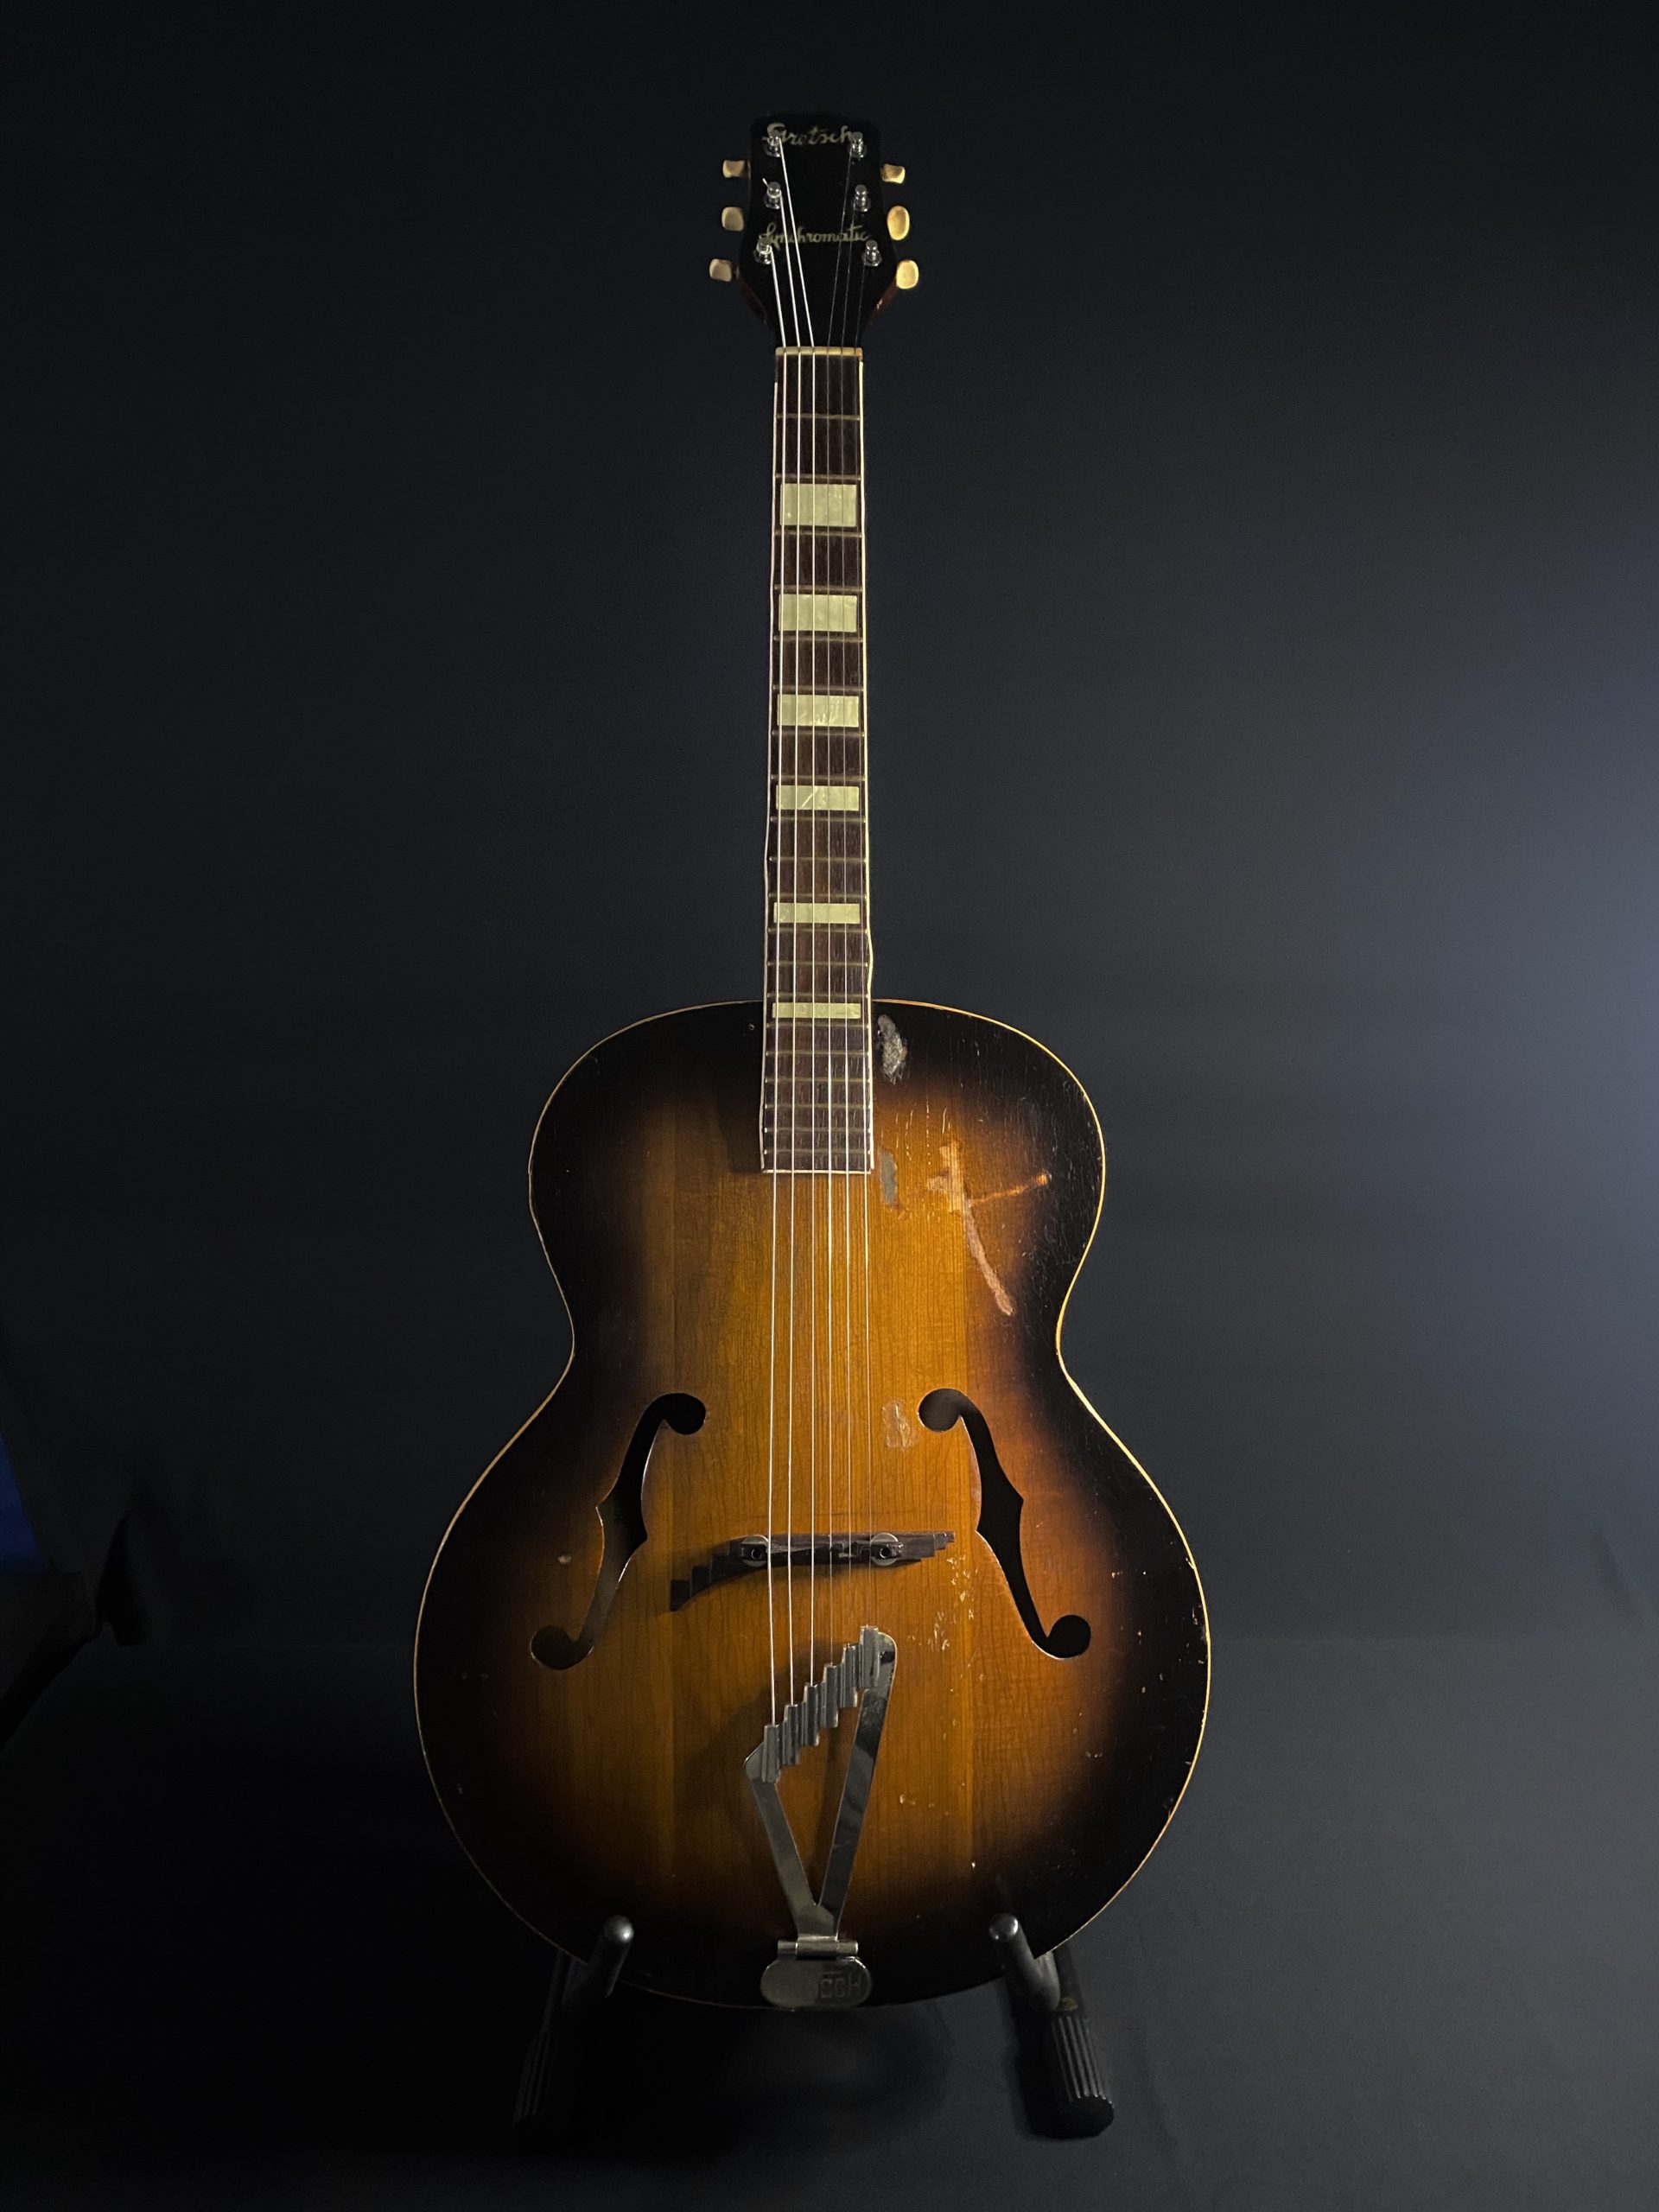 1952 Gretsch Synchromatic Archtop Vintage Guitar 09